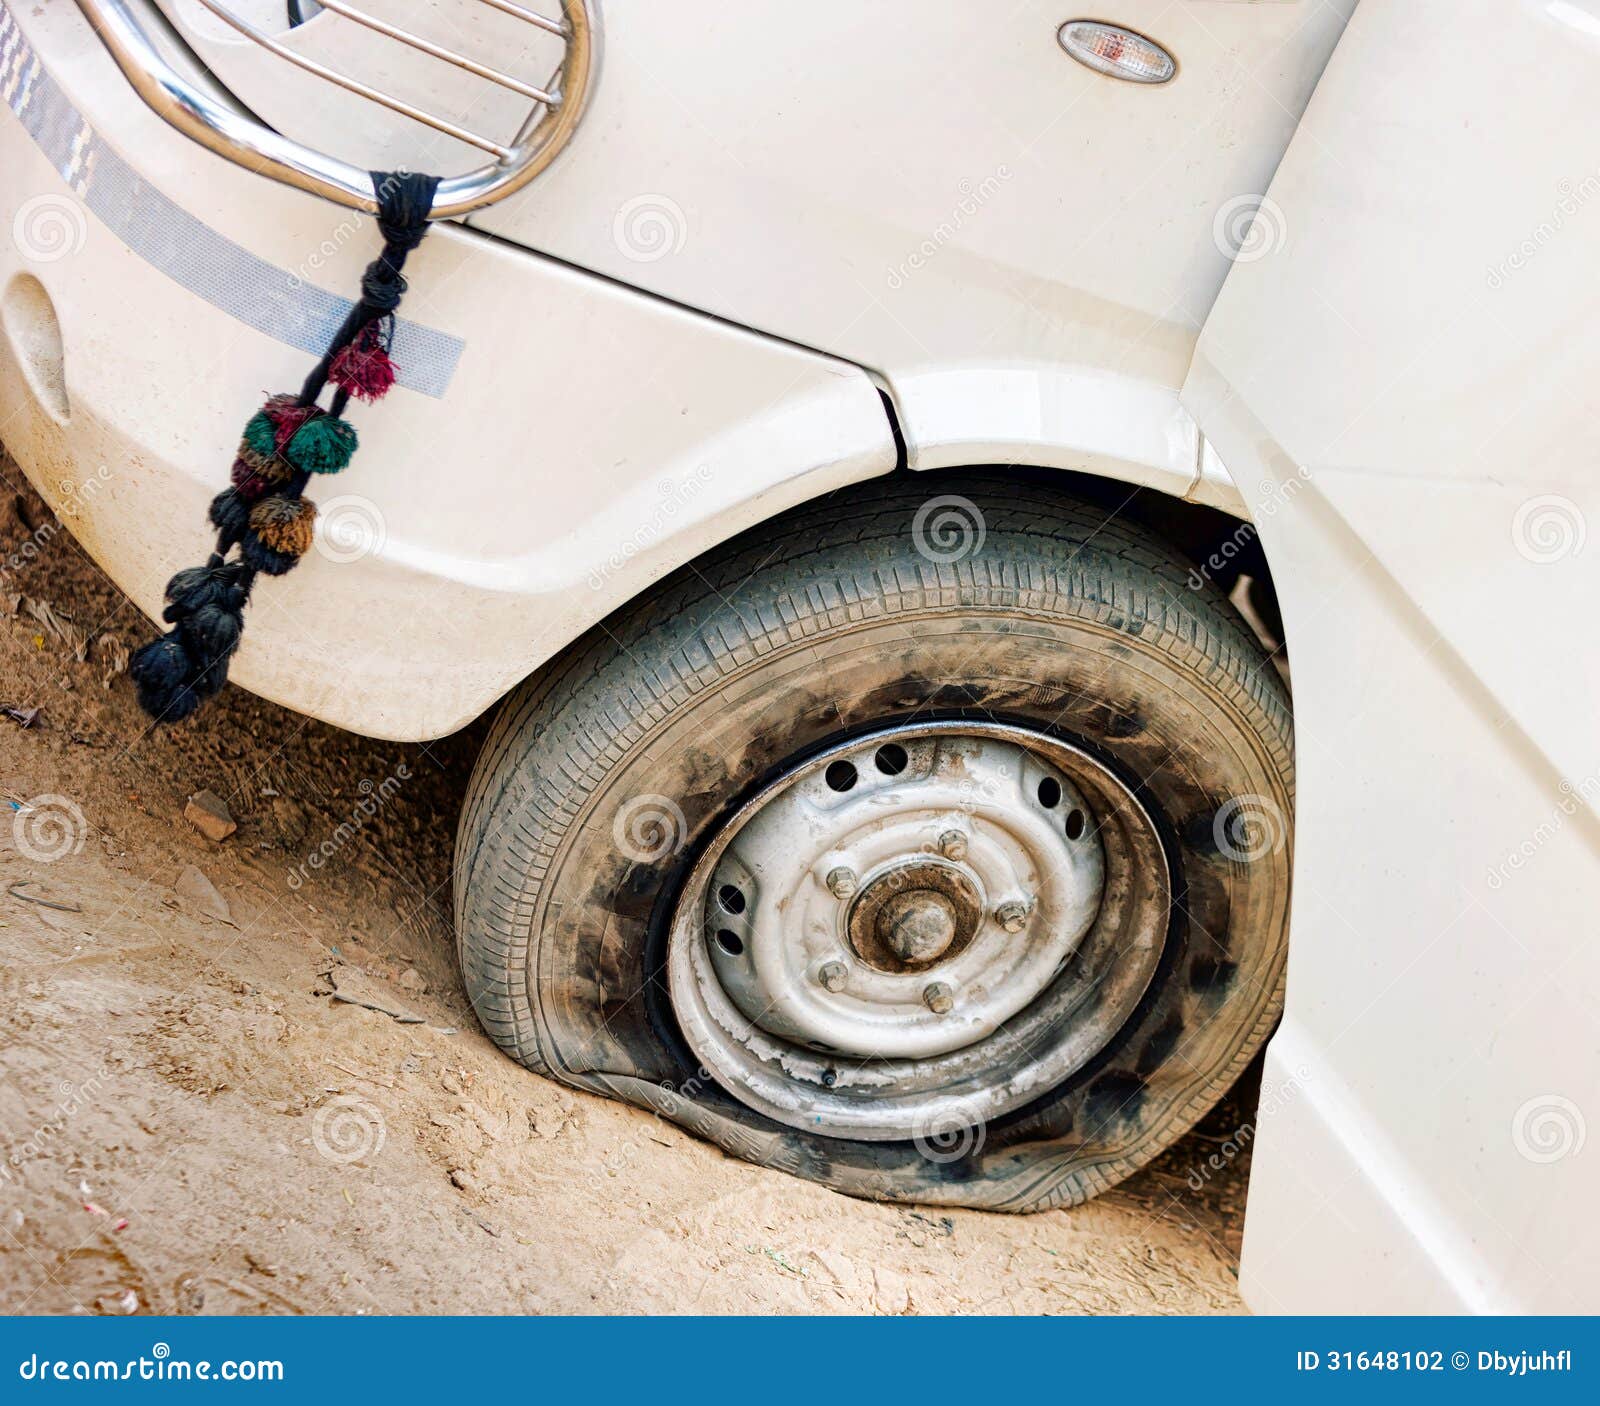 List 99+ Images picture of flat tire on white car at night Sharp